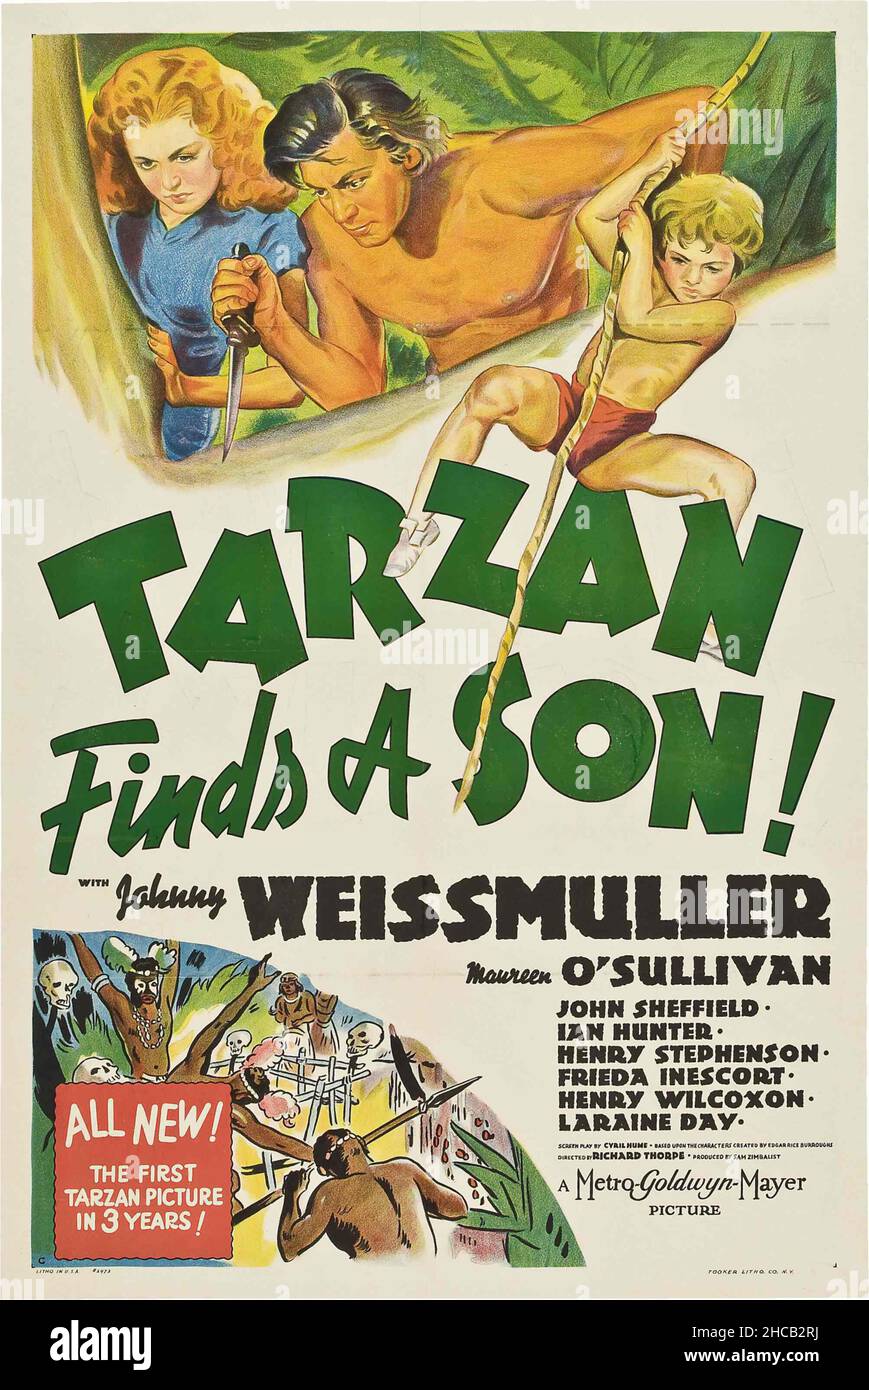 JOHNNY WEISSMULLER in TARZAN FINDS A SON! (1939), directed by RICHARD THORPE. Credit: M.G.M. / Album Stock Photo